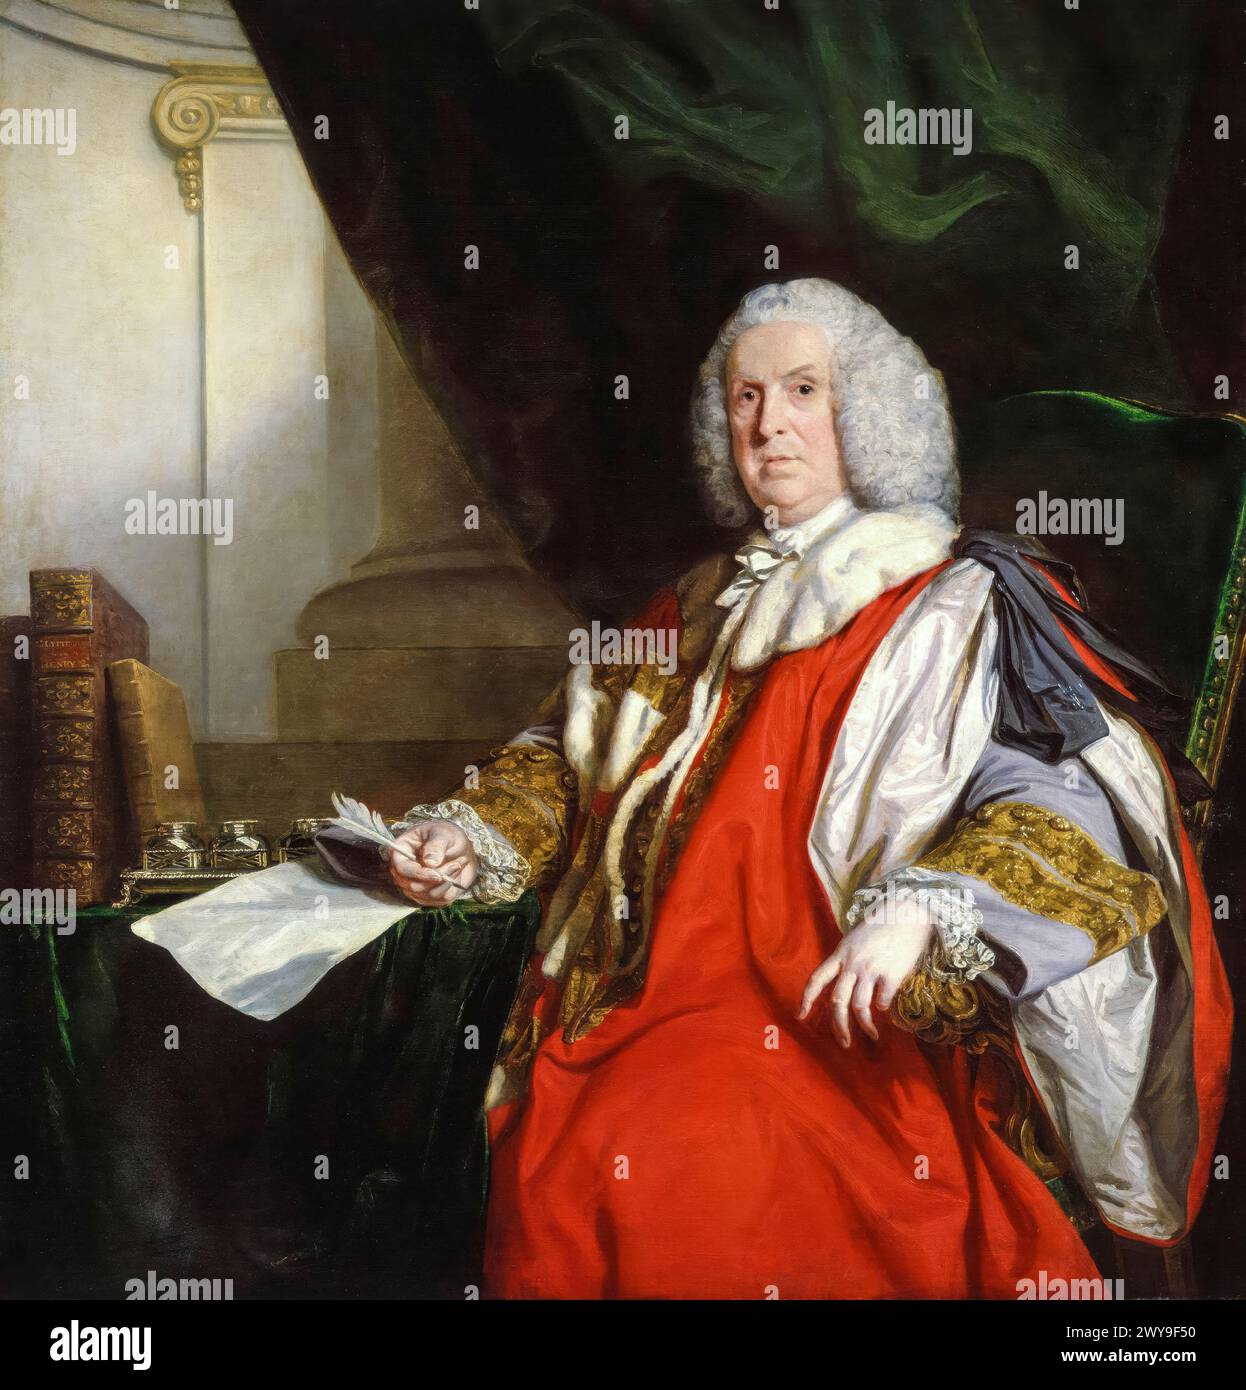 William Pulteney, 1st Earl of Bath (1684-1764), Whig politician and disputed Prime Minister of Great Britain 10-12 February 1746, portrait painting in oil on canvas by Sir Joshua Reynolds, 1761 Stock Photo